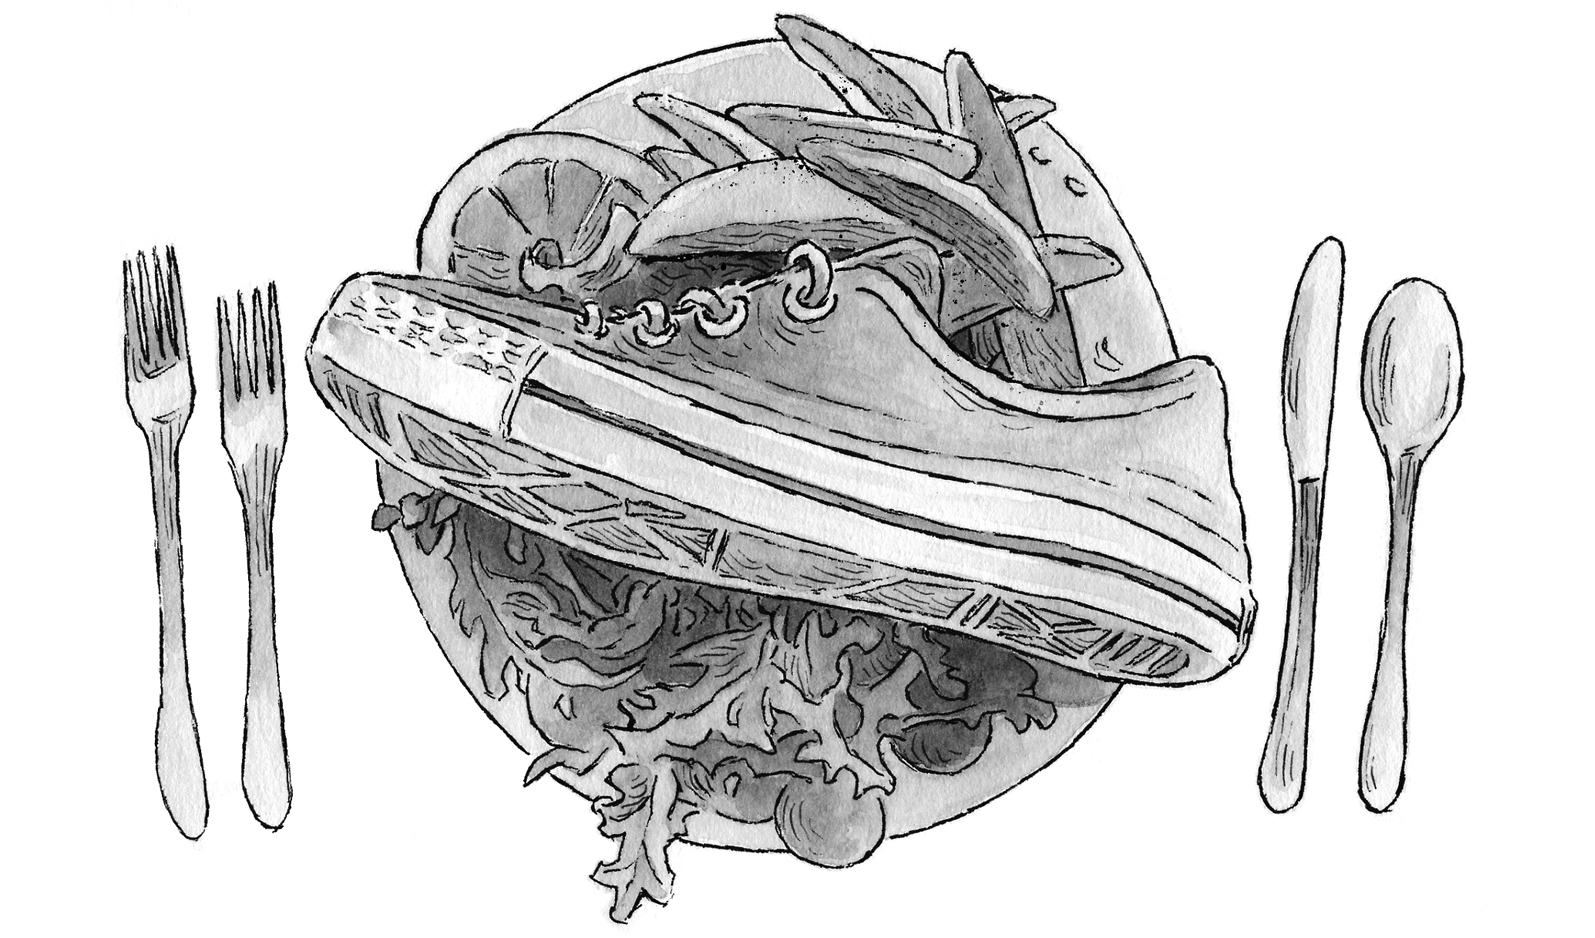 A somewhat less than delicious looking sneaker is perched atop an otherwise delectable looking dinner plate.